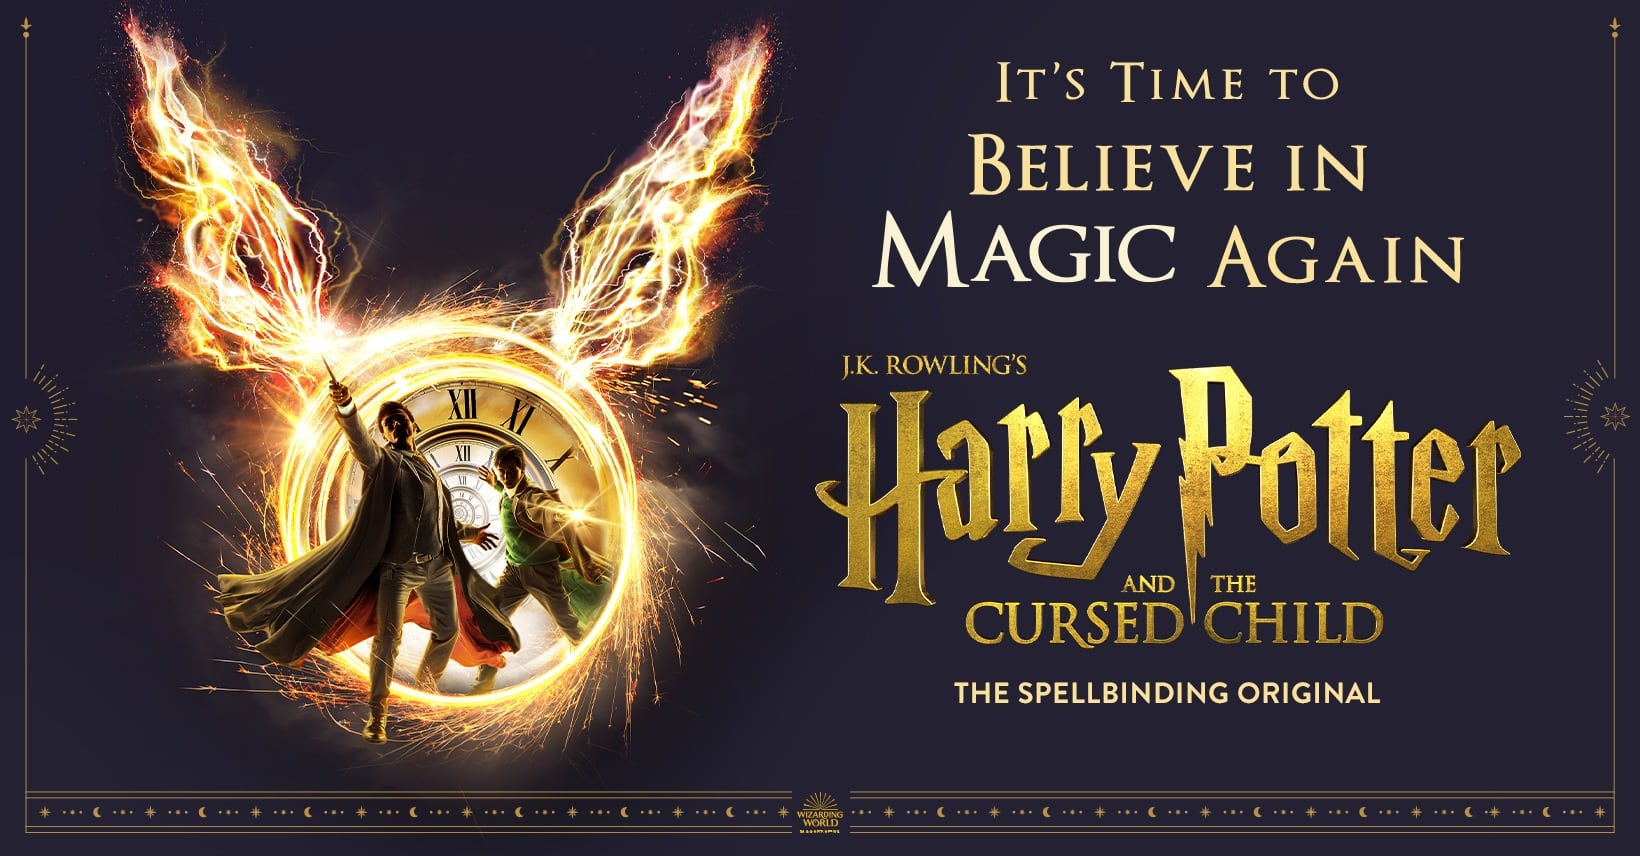 Book Tickets to Potter Play in | Site